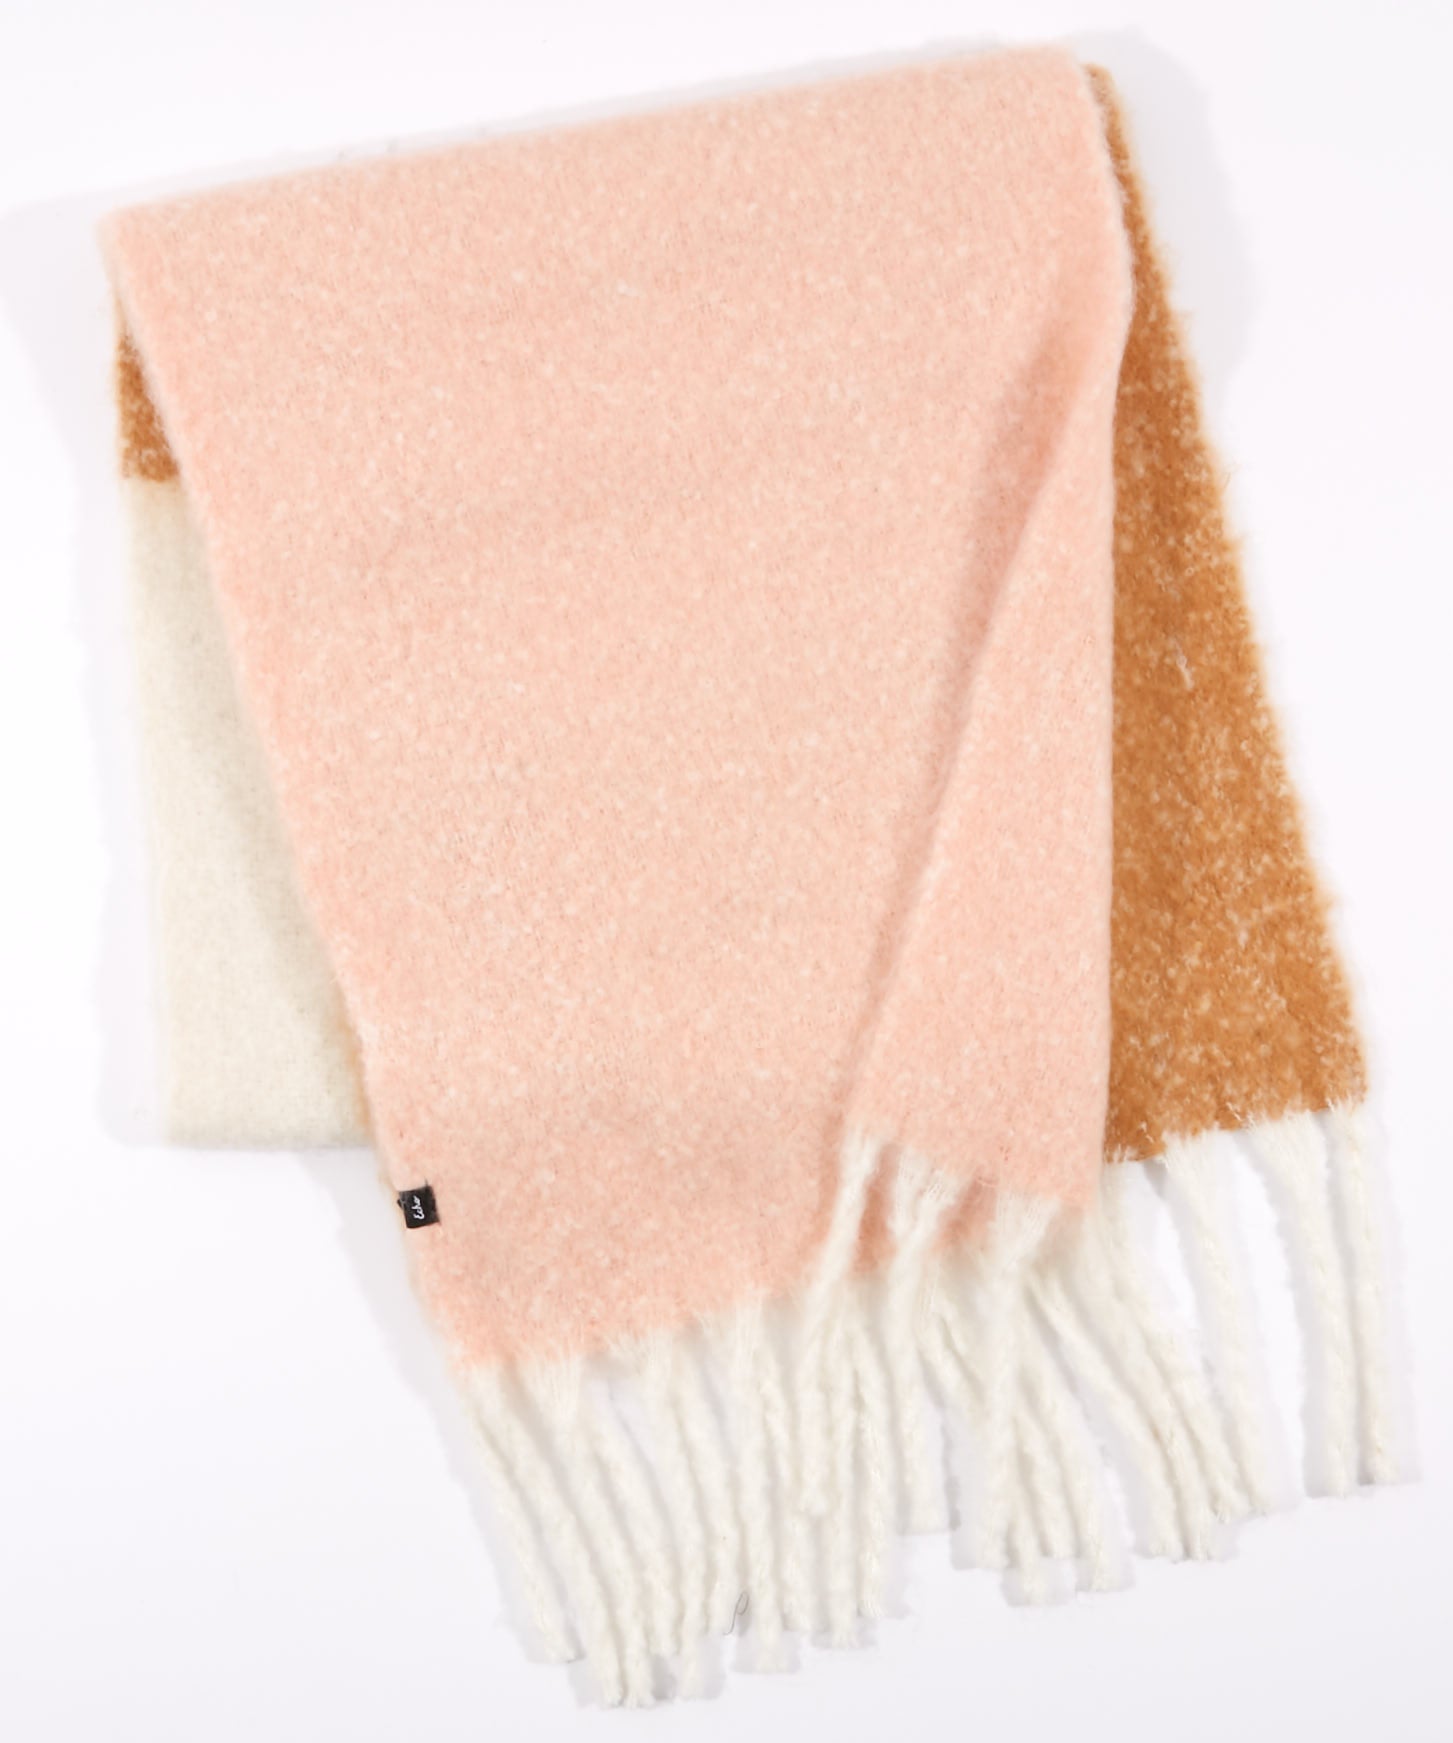 Brushed Blocked Scarf in color Oatmeal